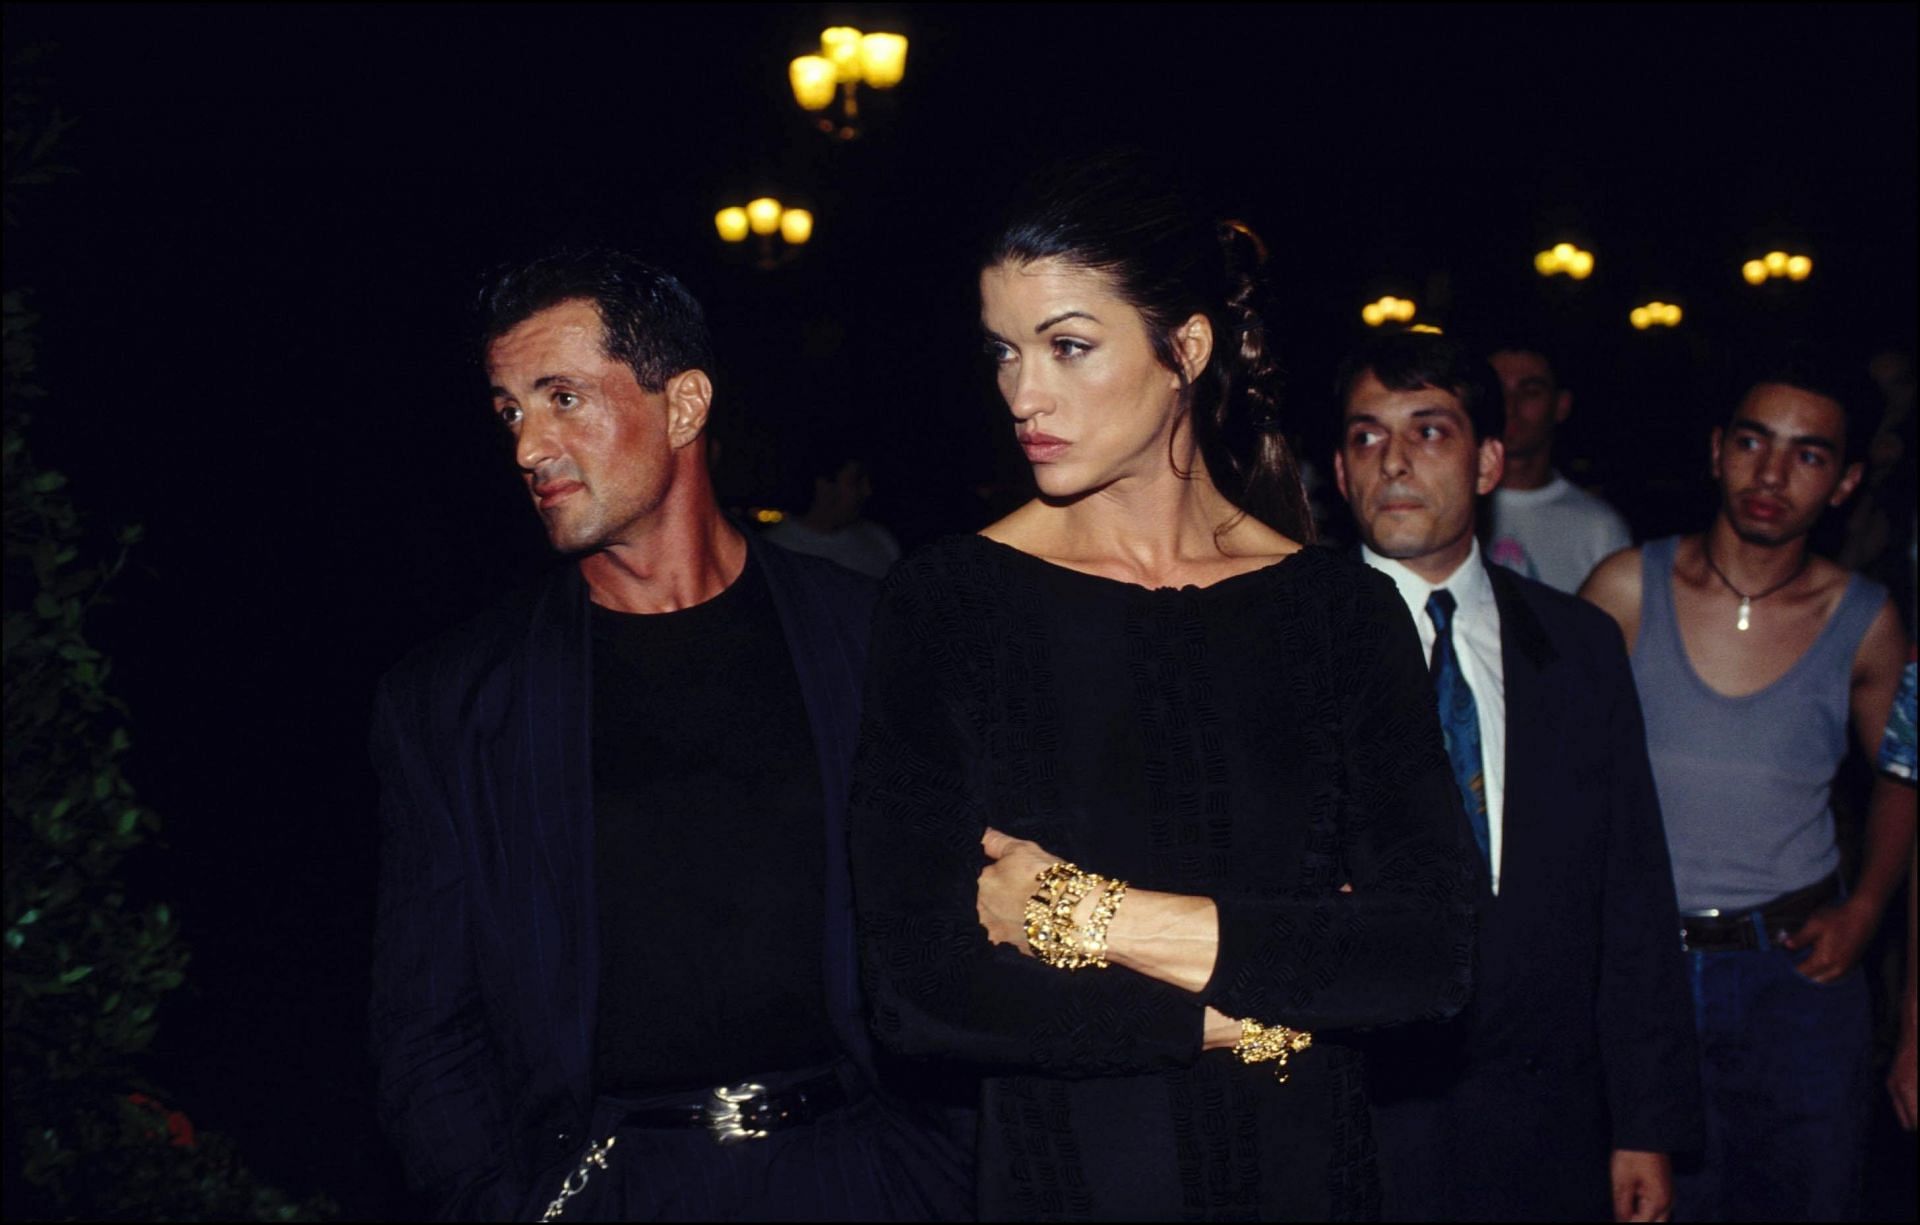 Sylvester Stallone and Janice Dickinson in 1994 (Image via Gamma-Rapho/Getty Images)